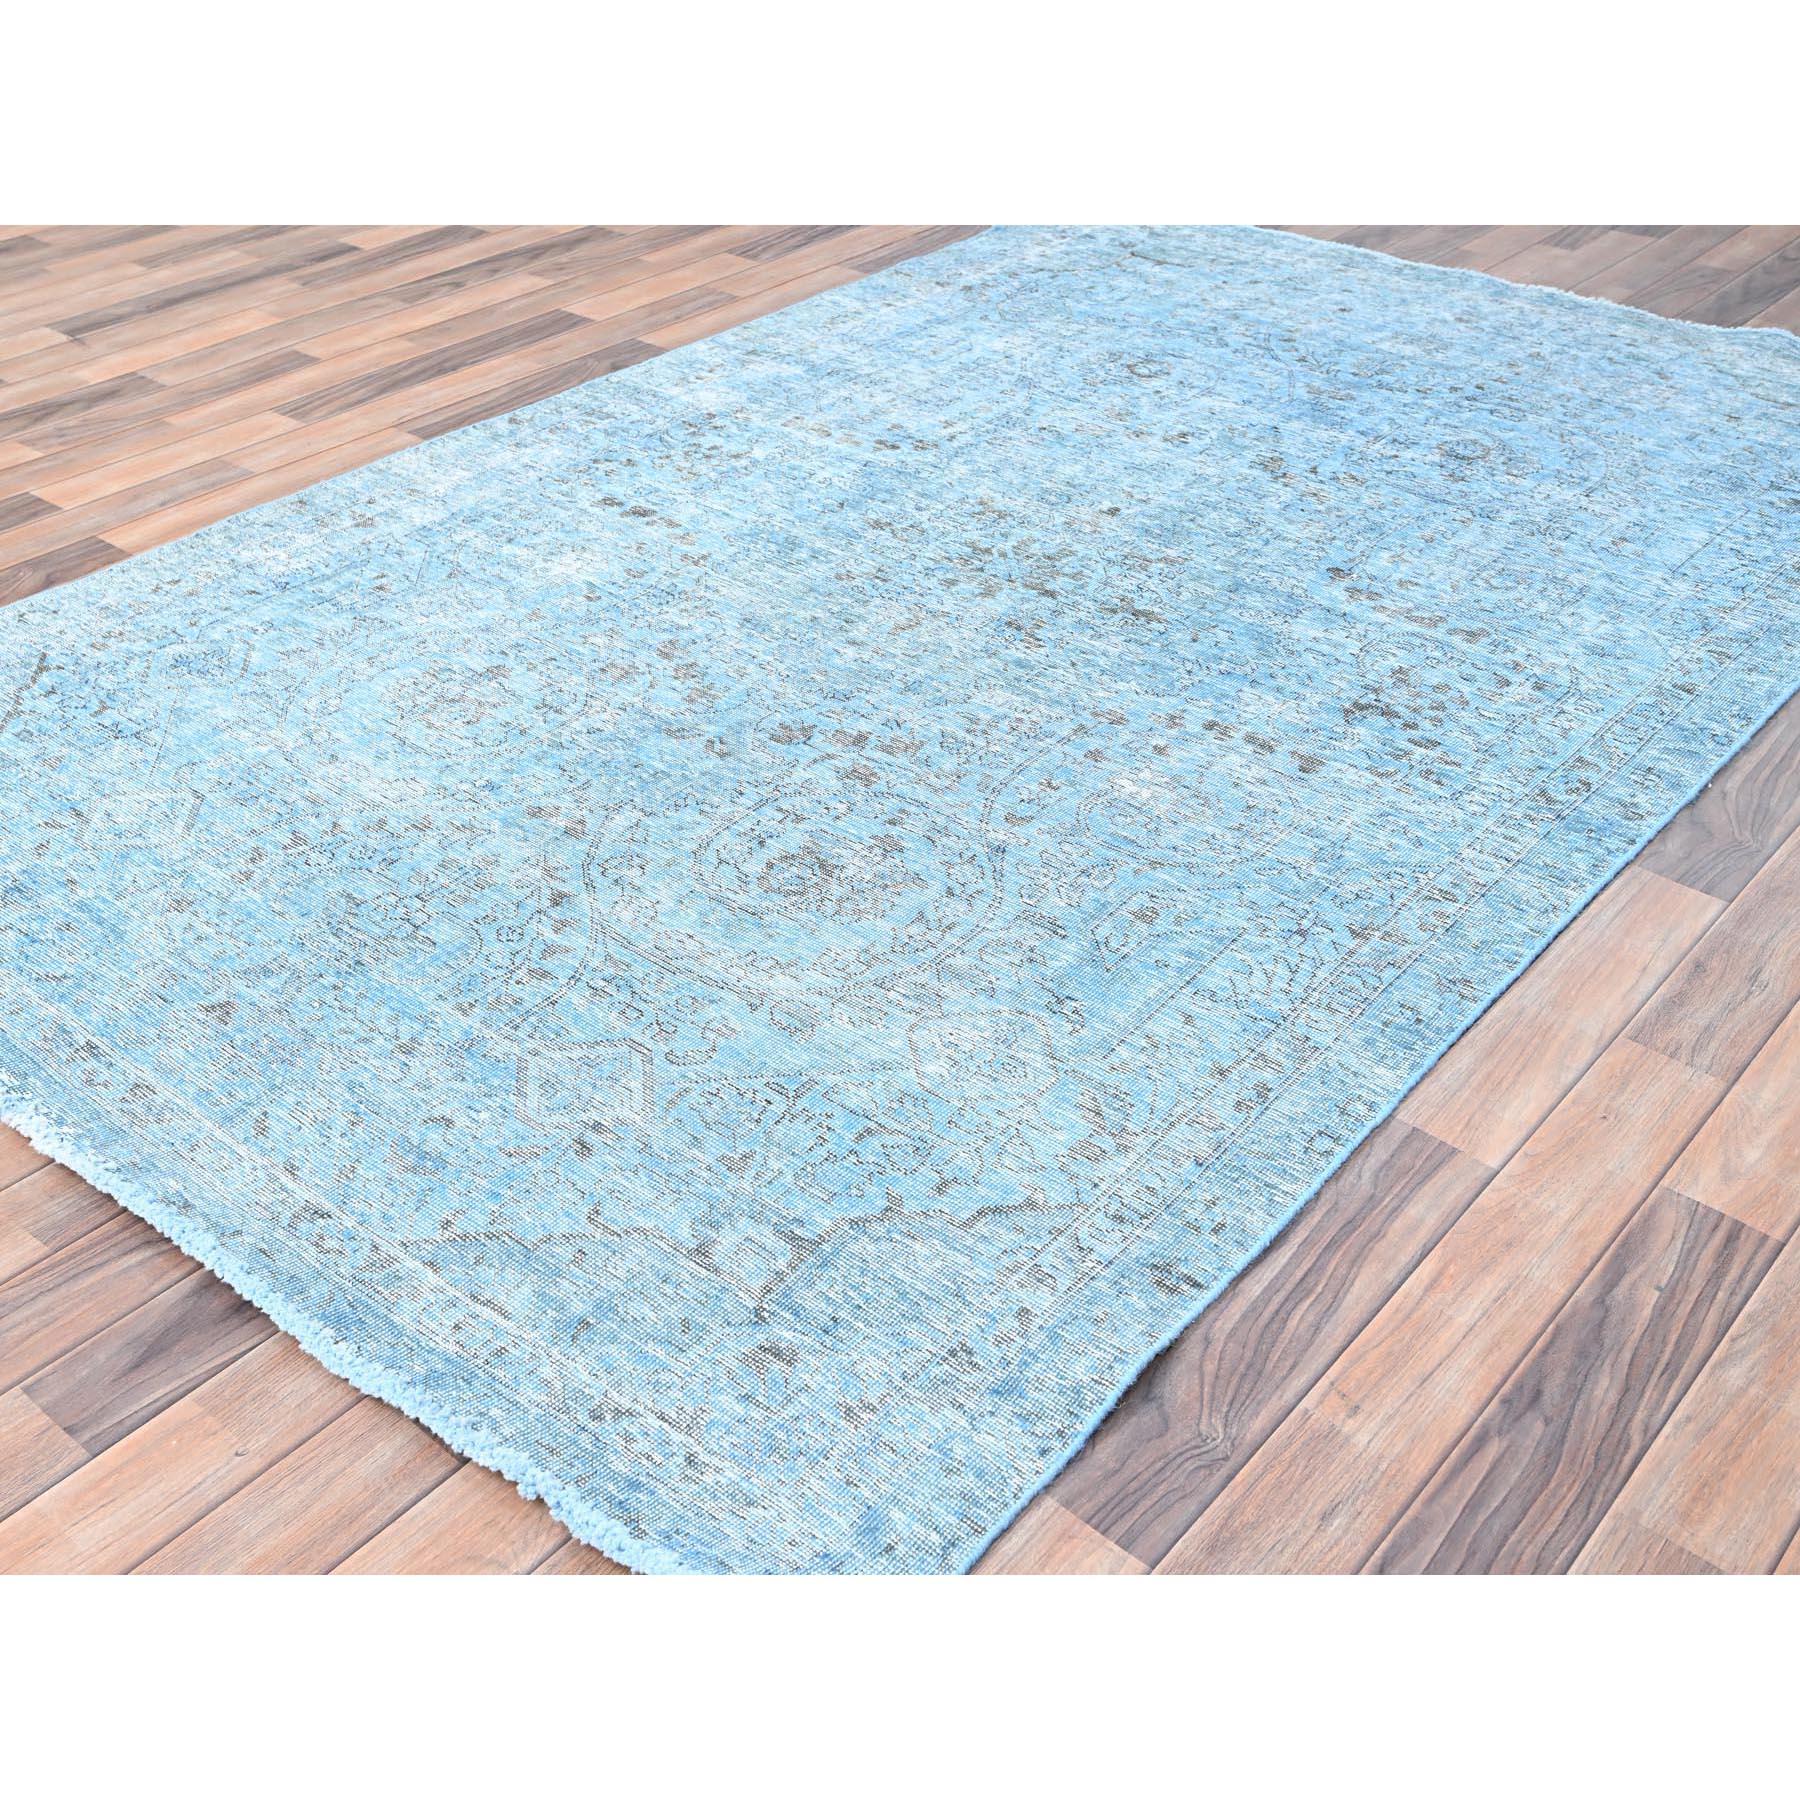 Baby Blue Vintage Persian Tabriz Distressed Overdyed Worn Wool Hand Knotted Rug In Fair Condition For Sale In Carlstadt, NJ